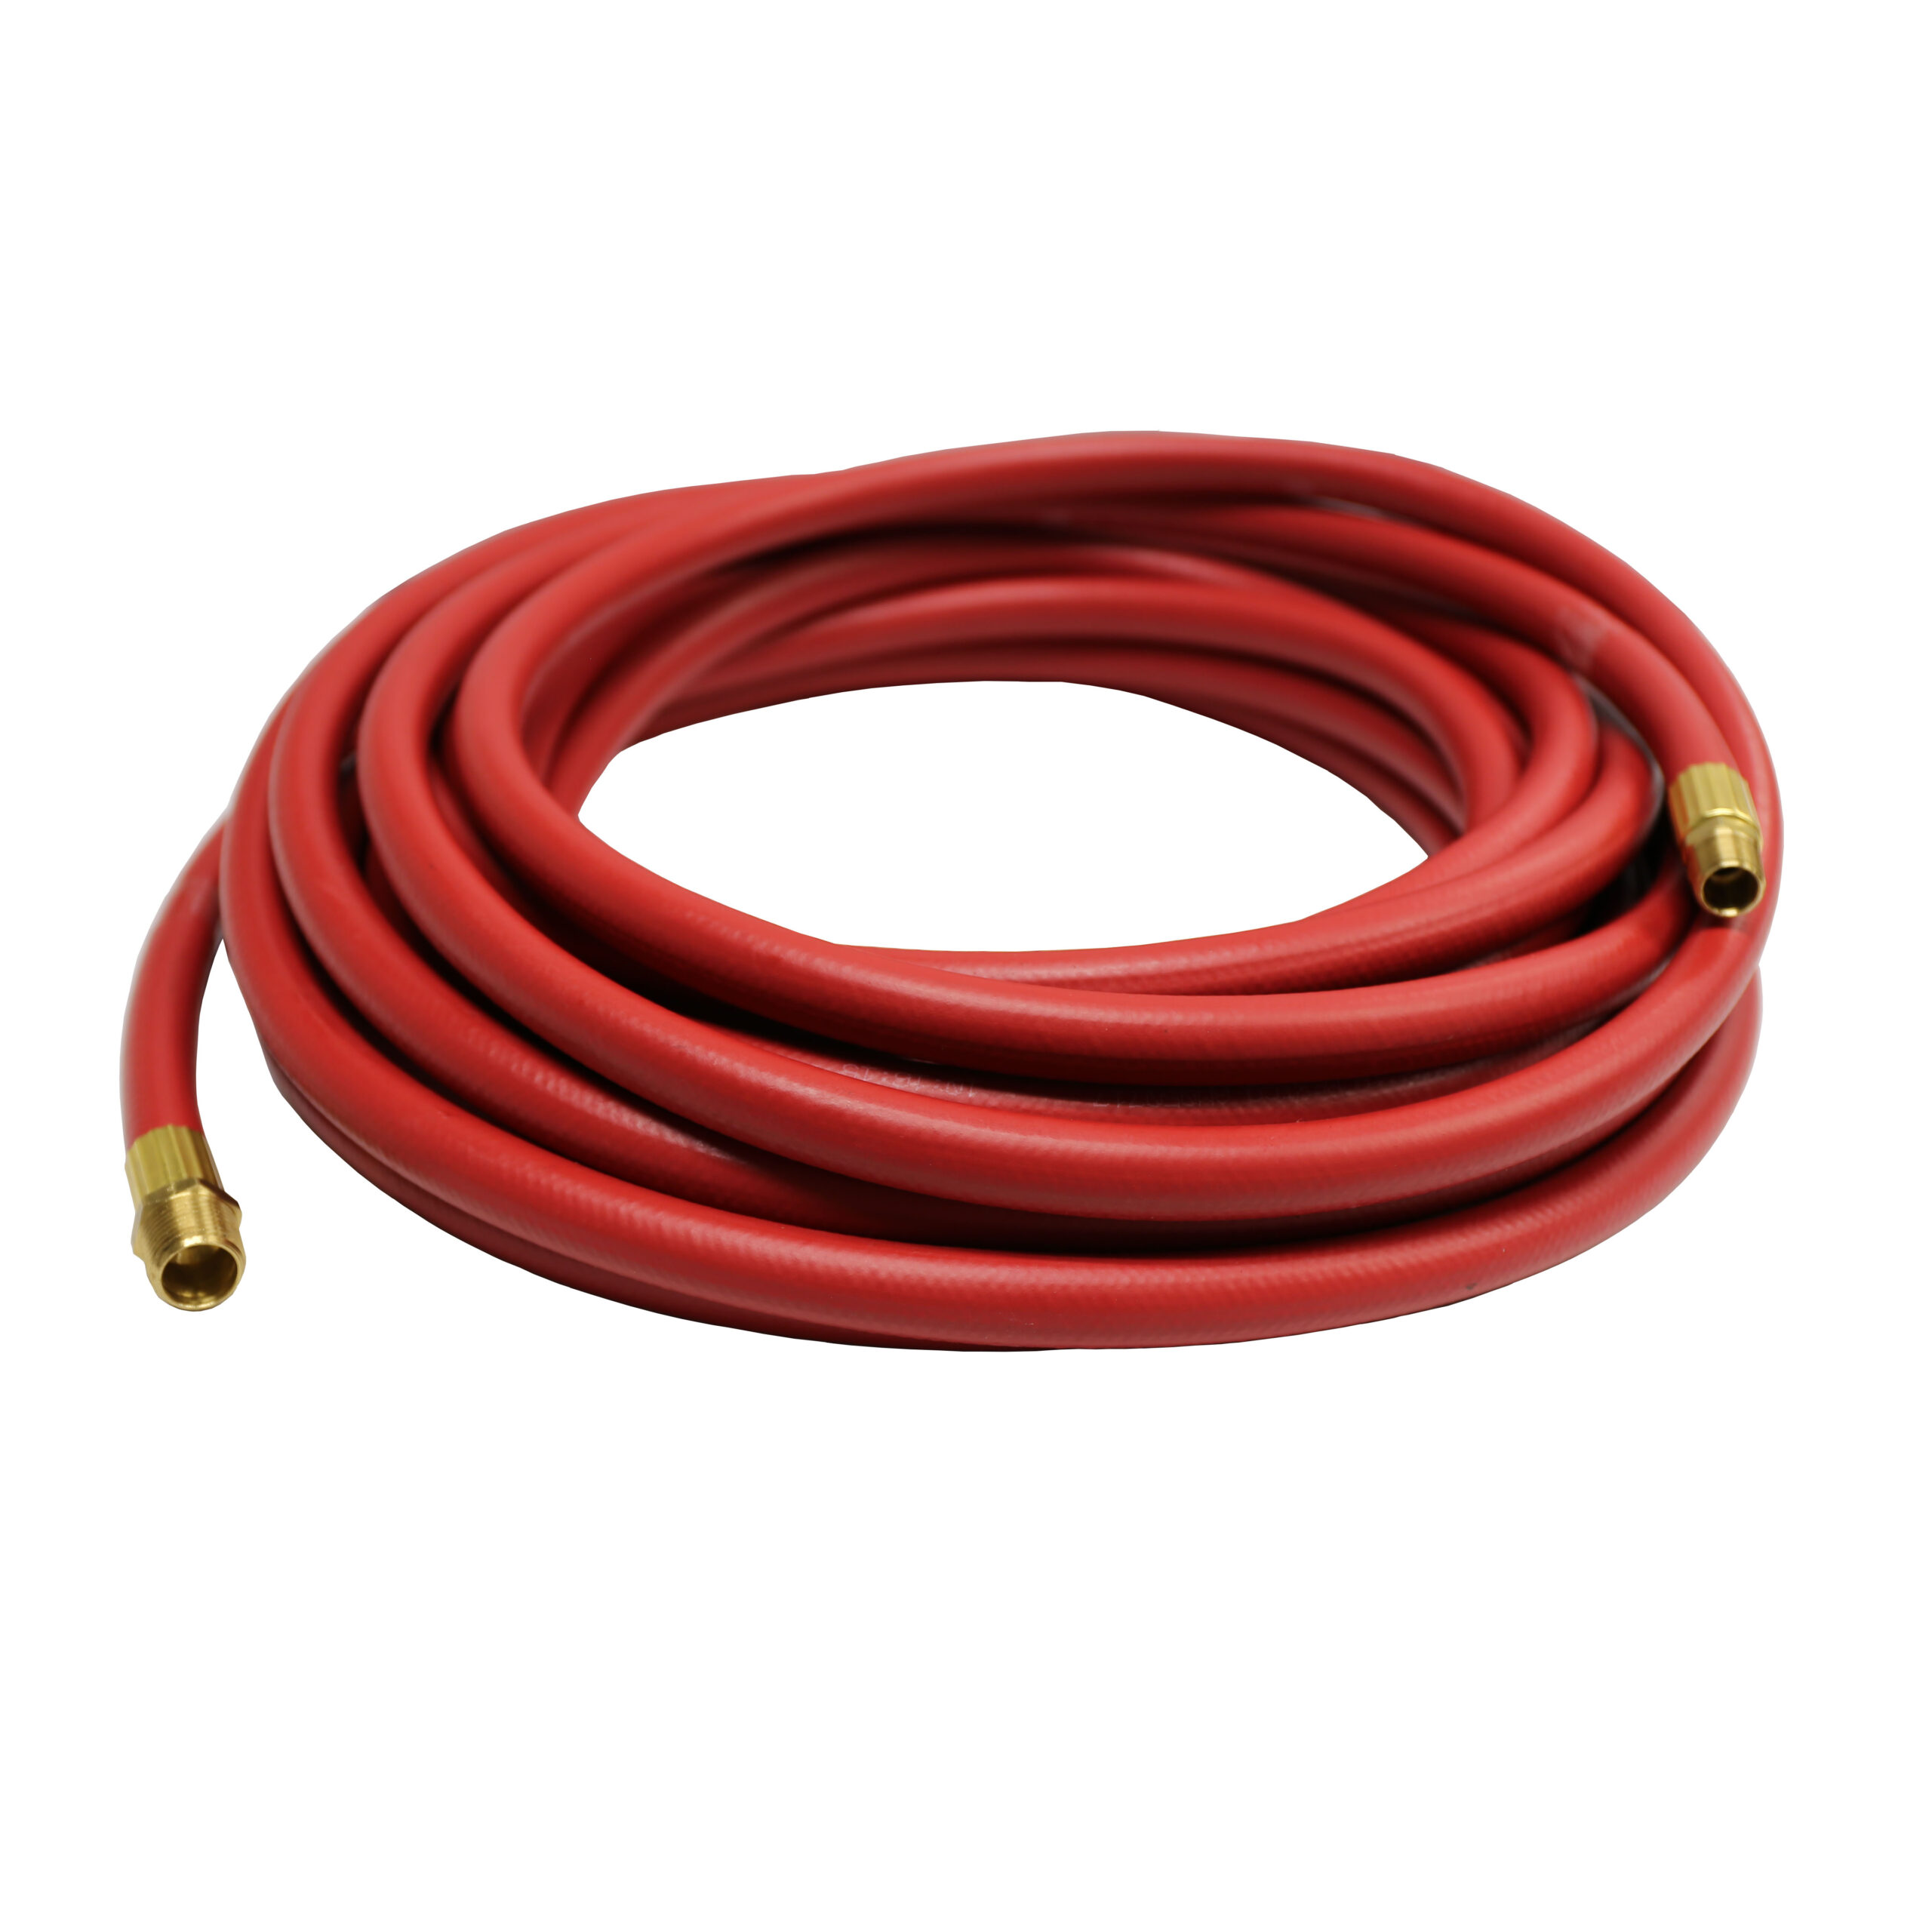 Reelcraft 601145-50 - 5/8 in. x 50 ft. Low Pressure Rubber Air Hose